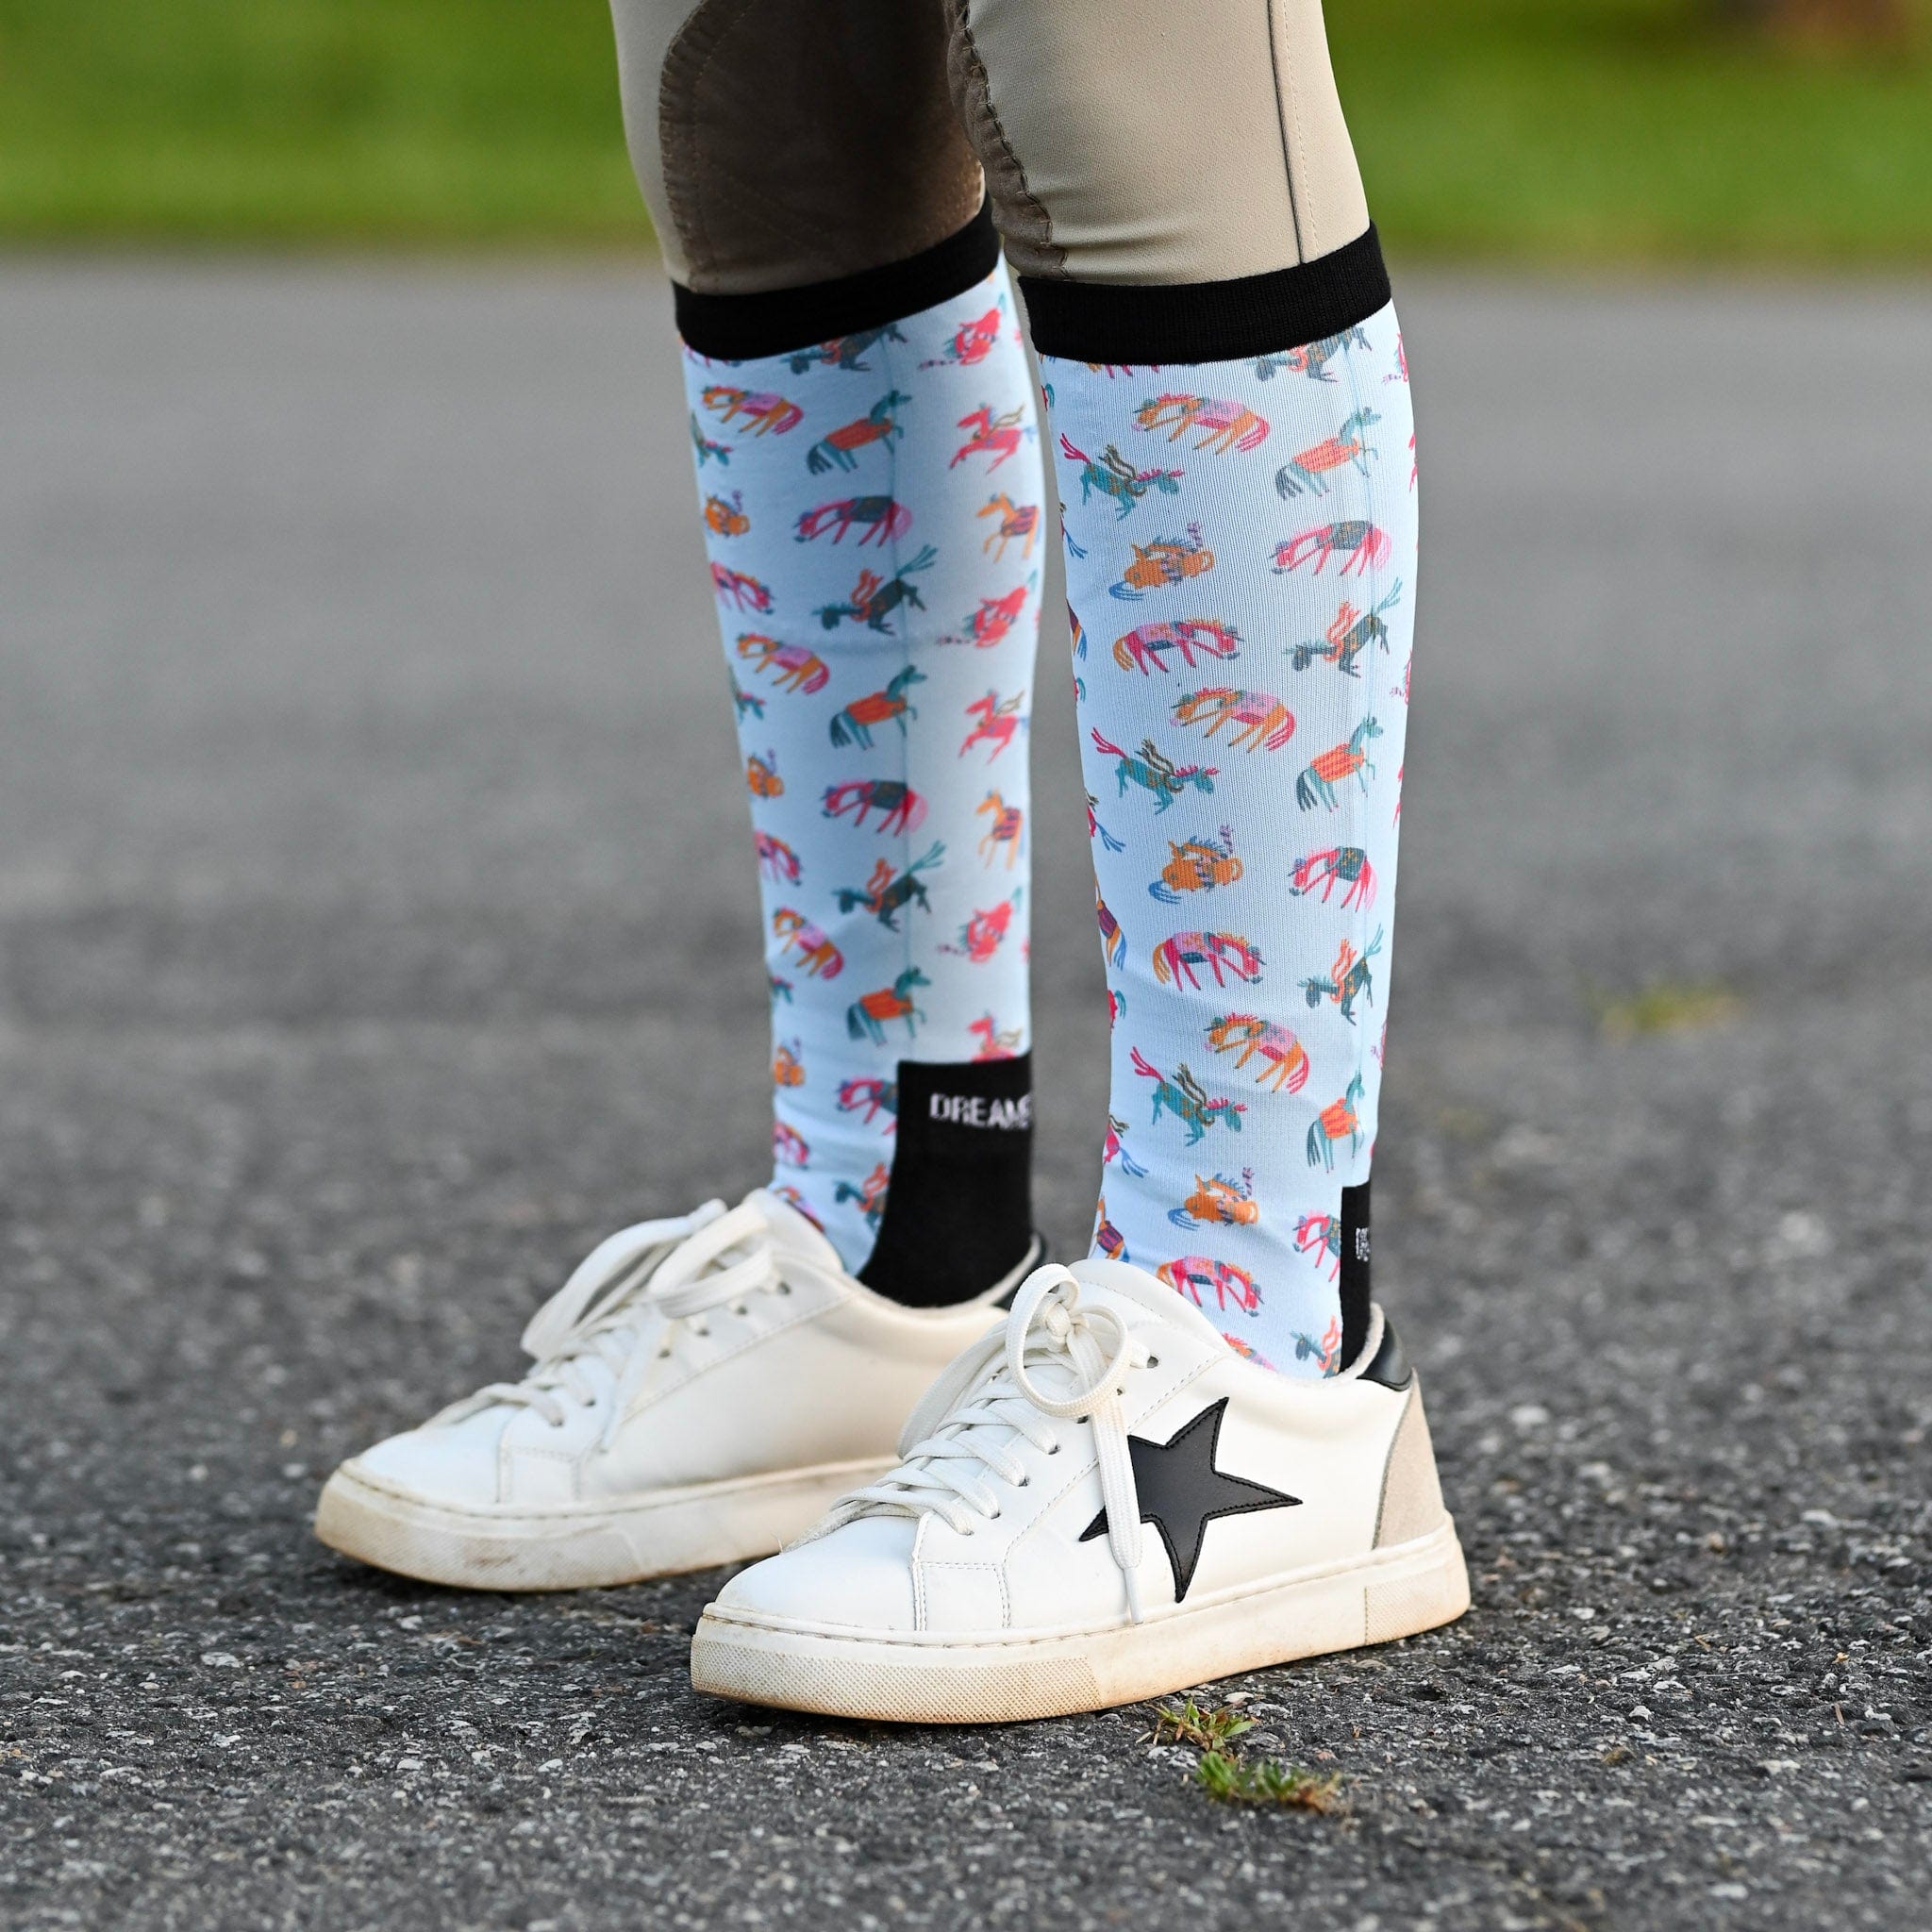 dreamers & schemers Youth Pair & a Spare Light Jacket Youth Pair & a Spare equestrian boot socks boot socks thin socks riding socks pattern socks tall socks funny socks knee high socks horse socks horse show socks